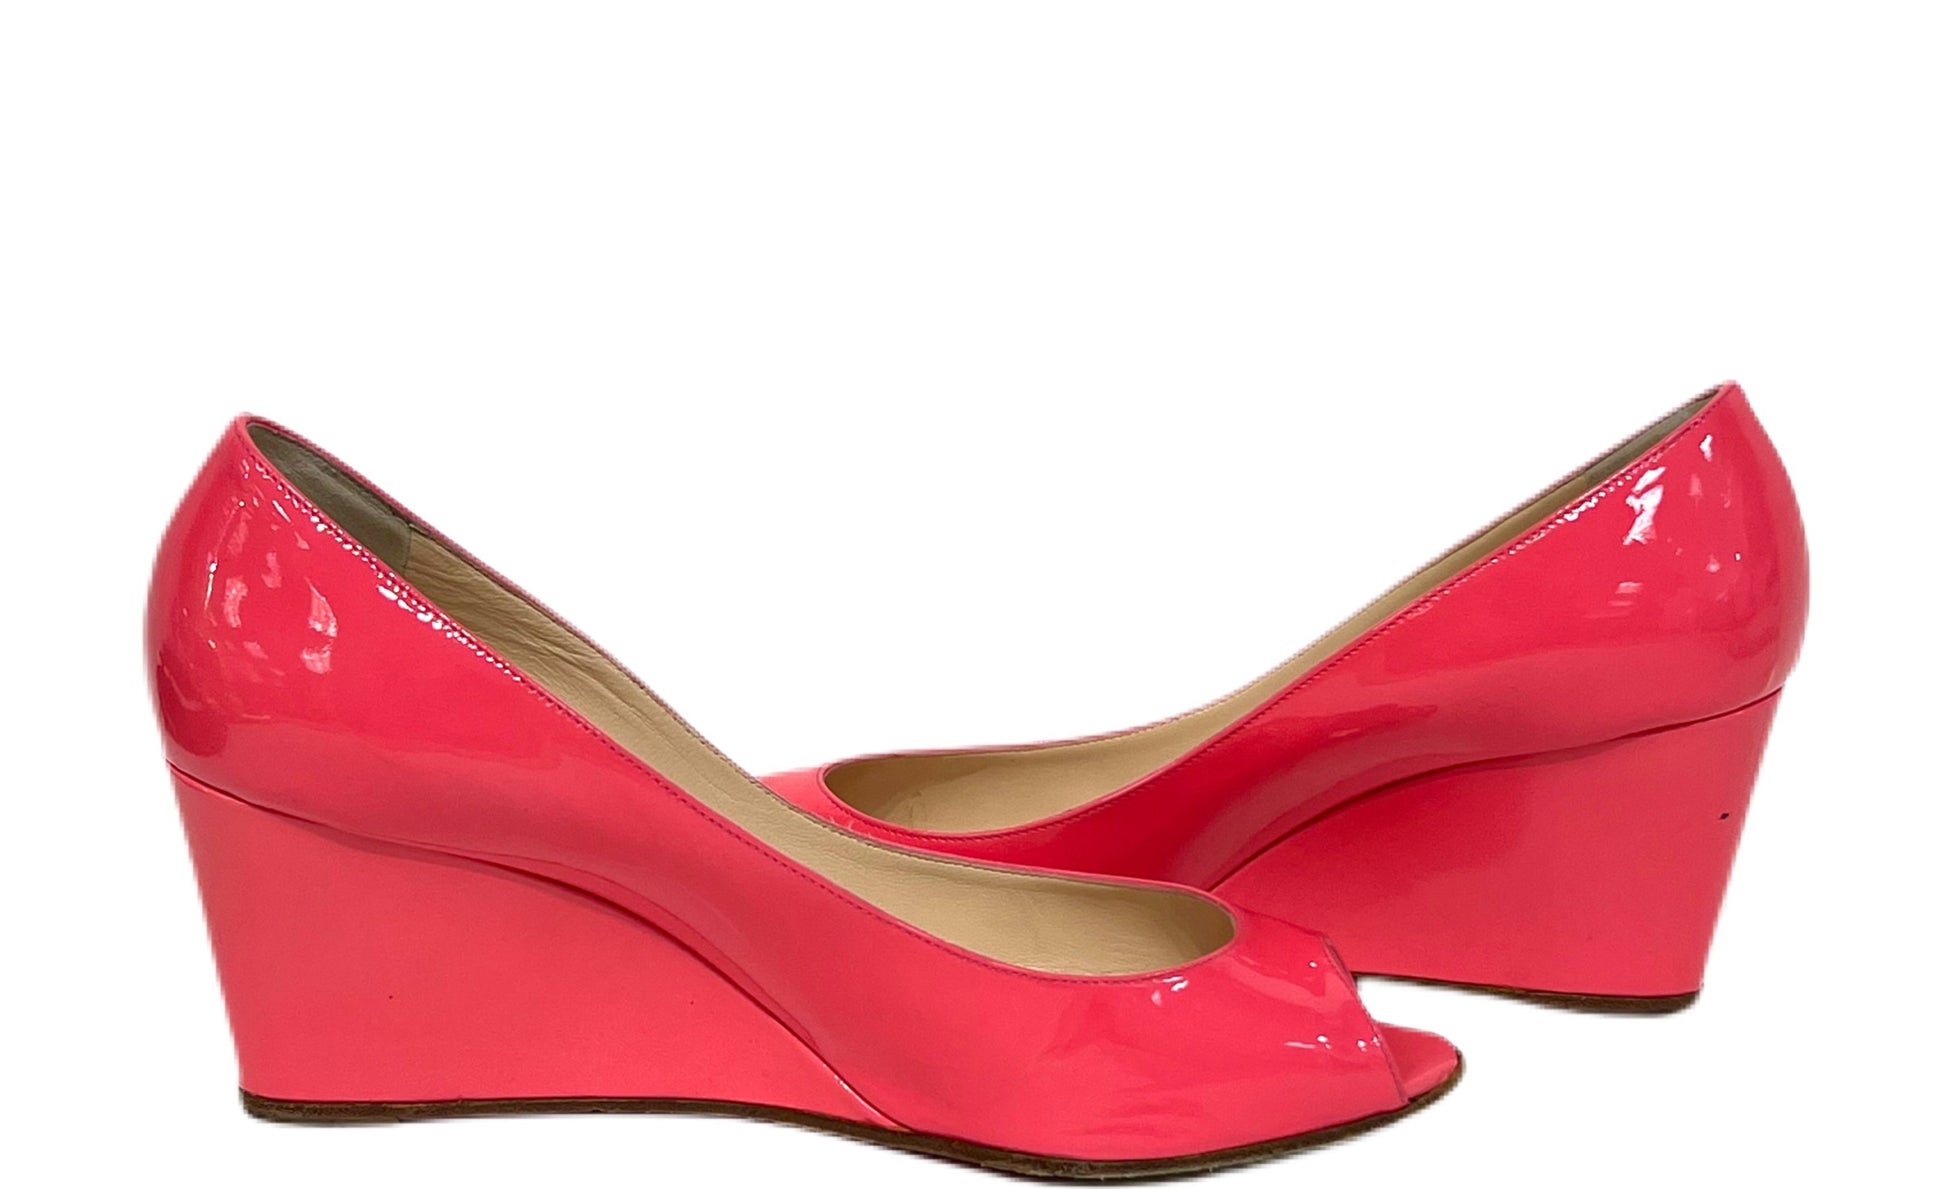 Patent leather wedge sandals in pink - Christian Louboutin